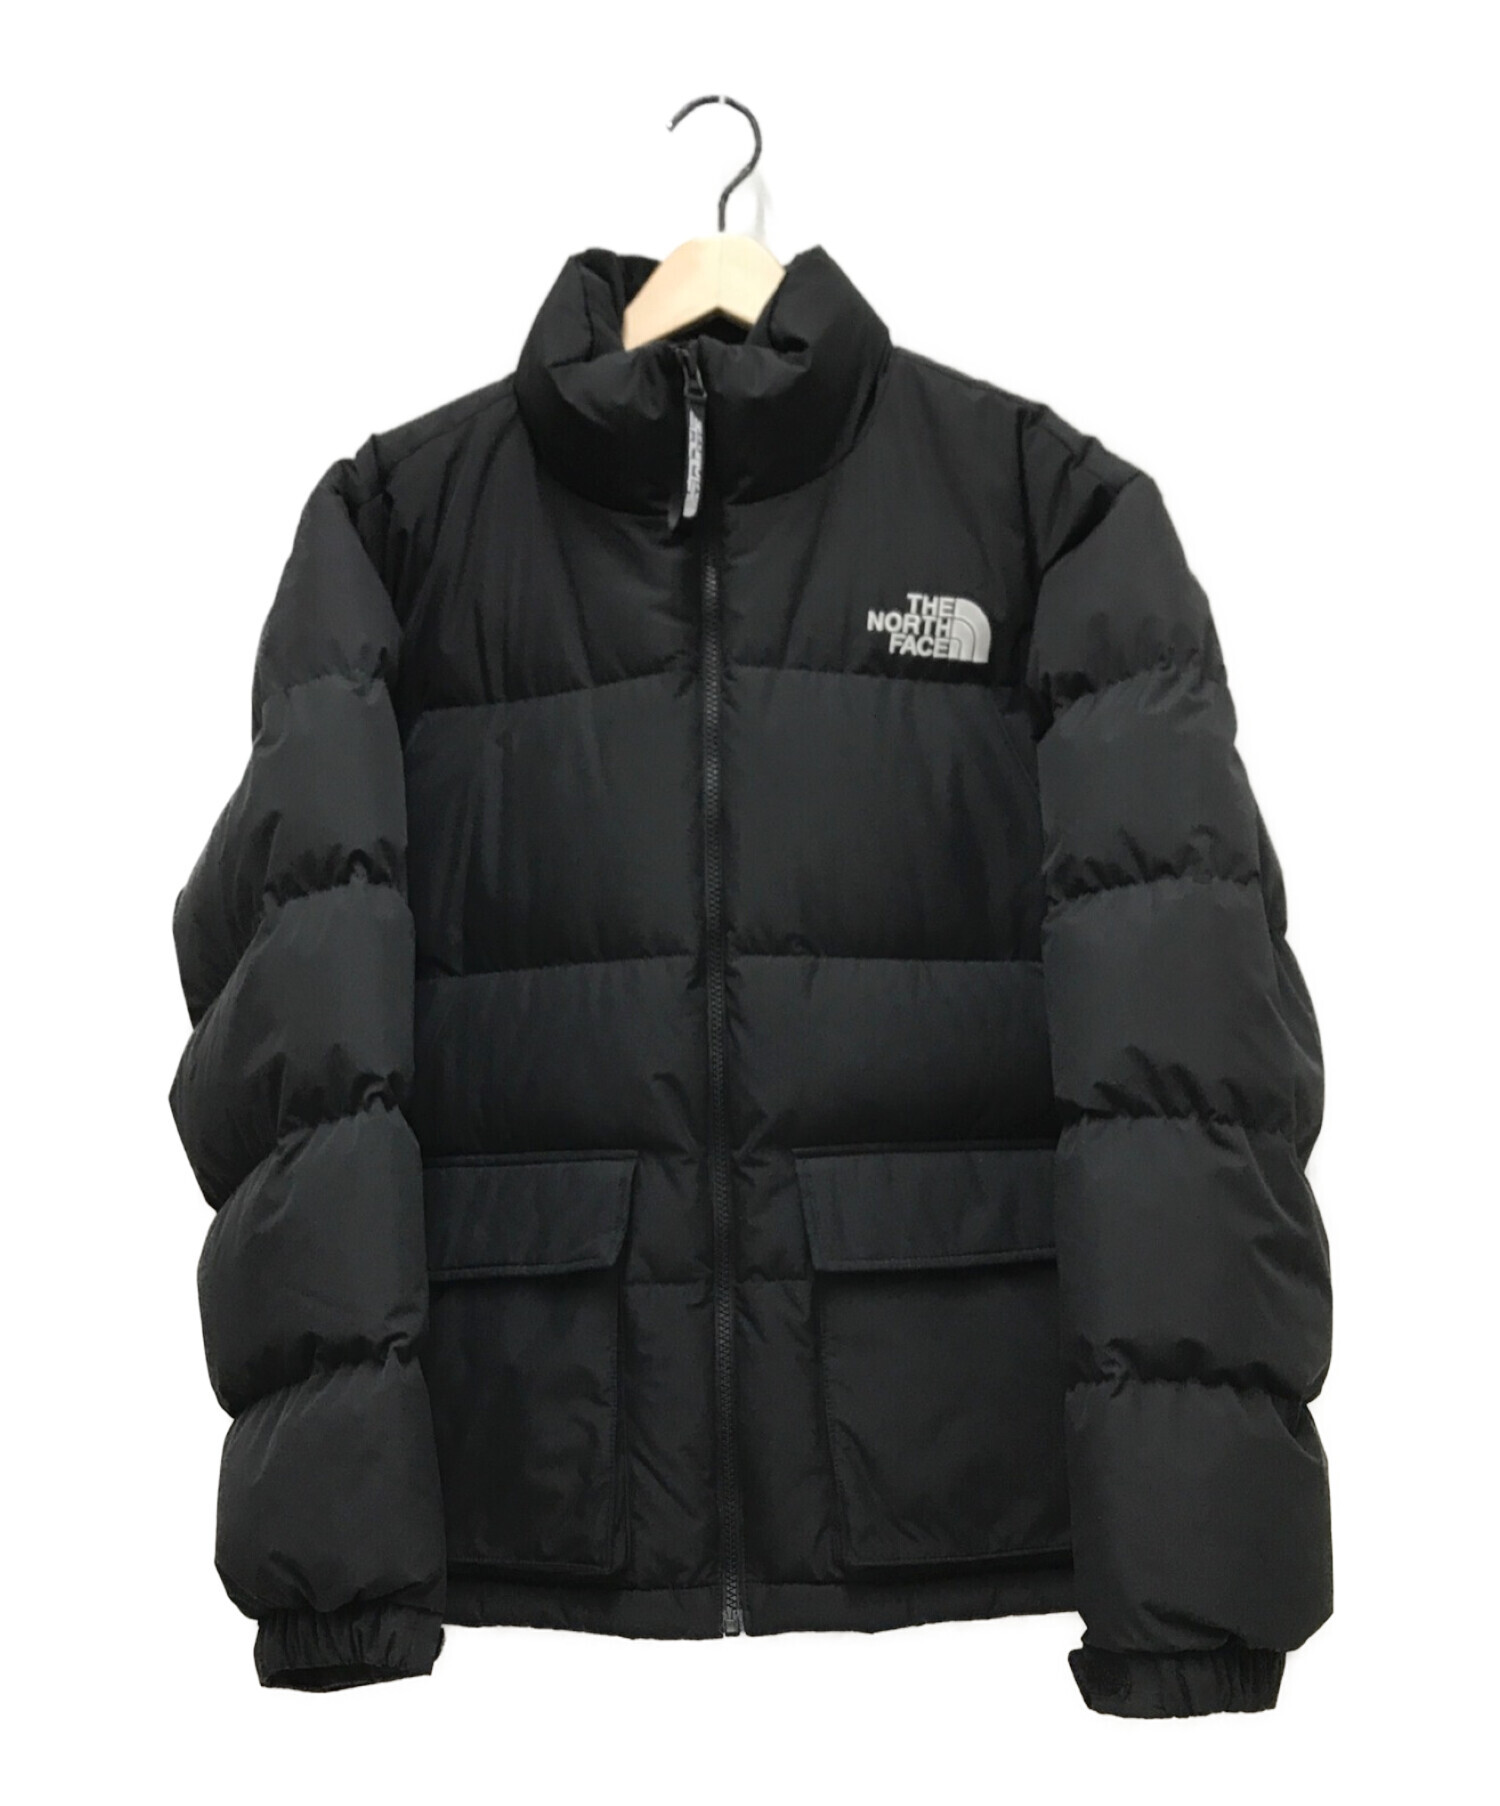 THE NORTH FACE YOUTRO PUFFER DOWN JACKET - envie-detre-soi.com